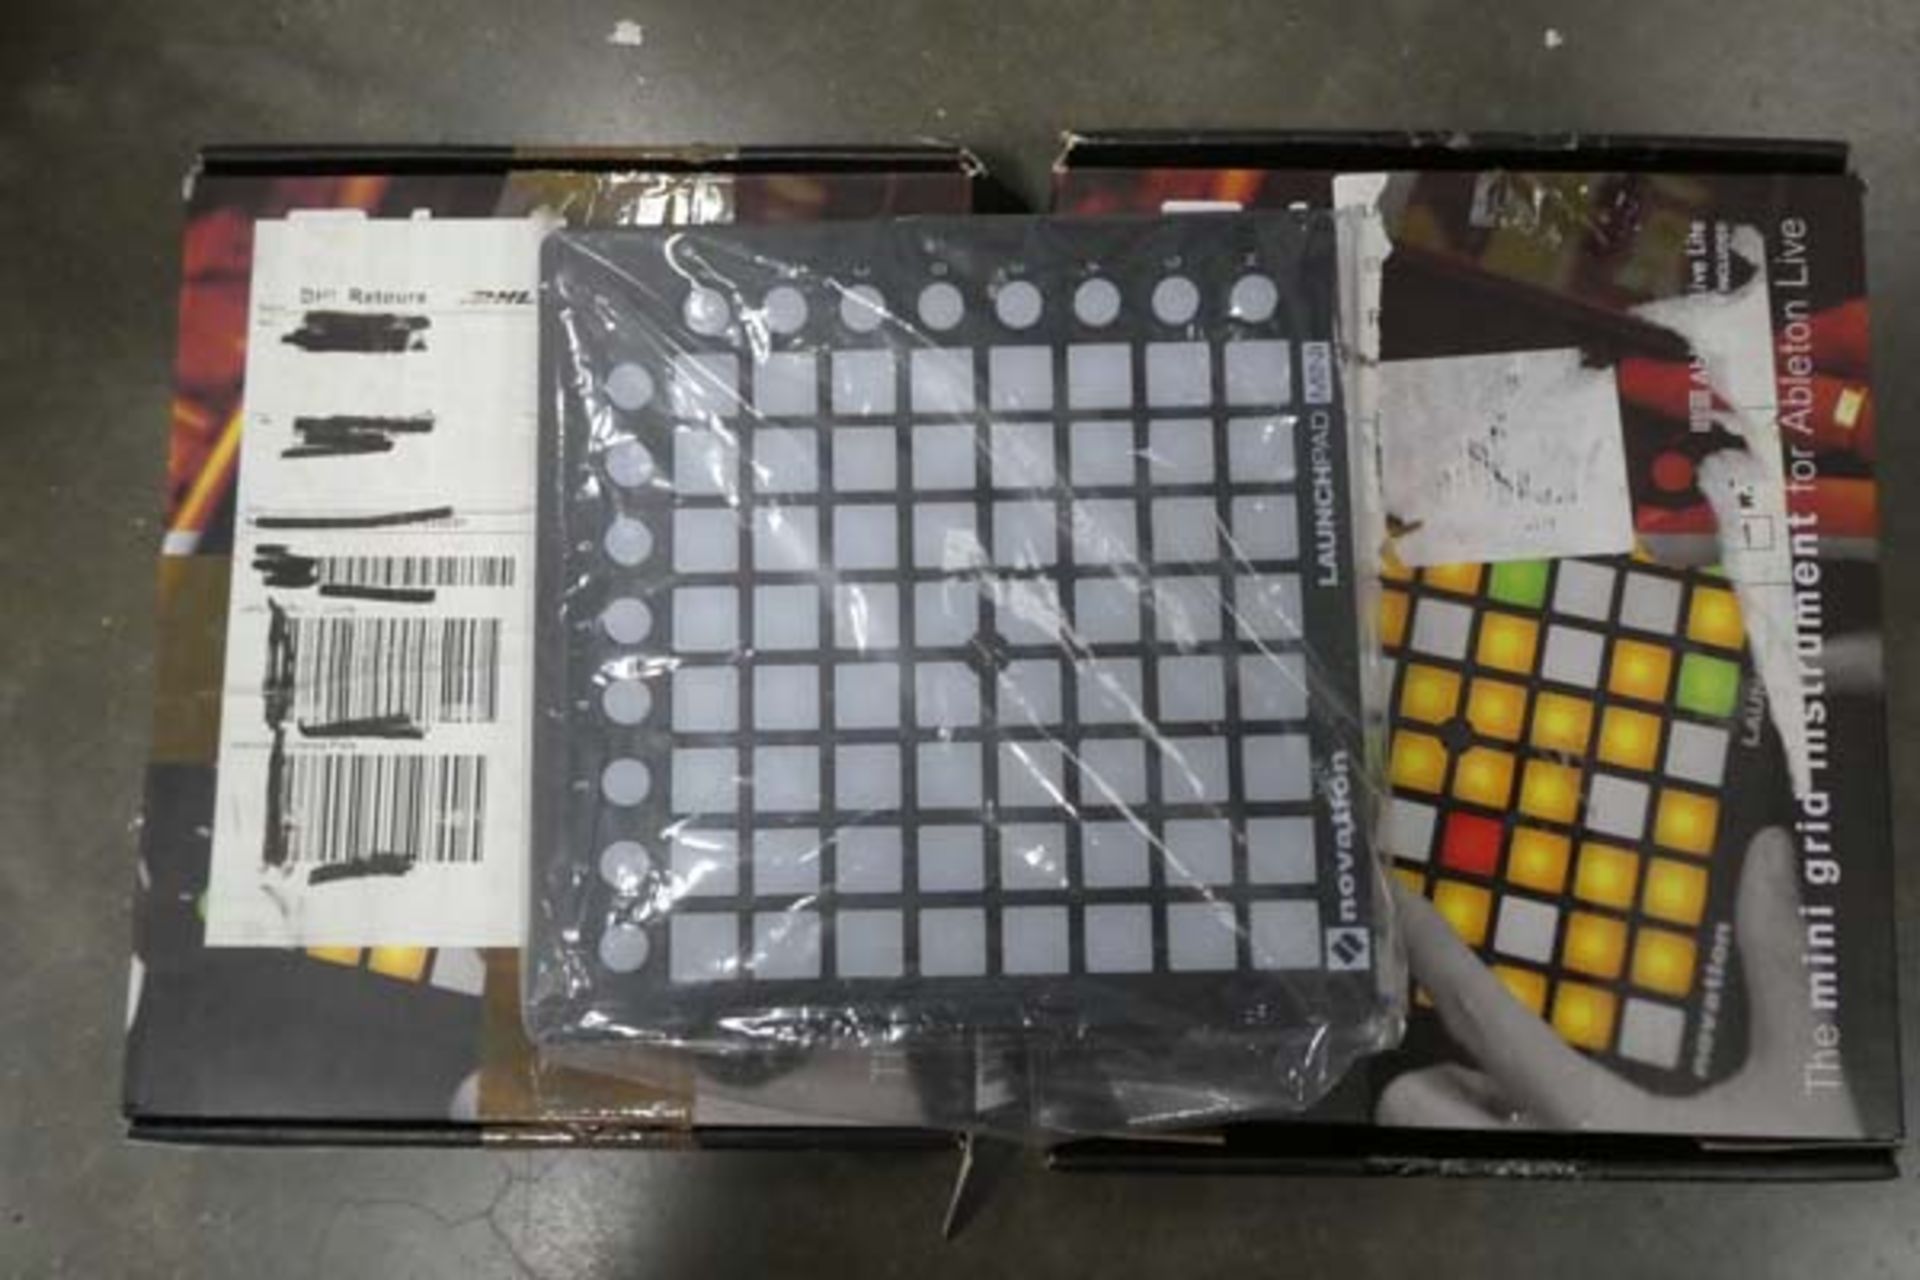 Two Novation Launchpad Mini USB kits in boxes